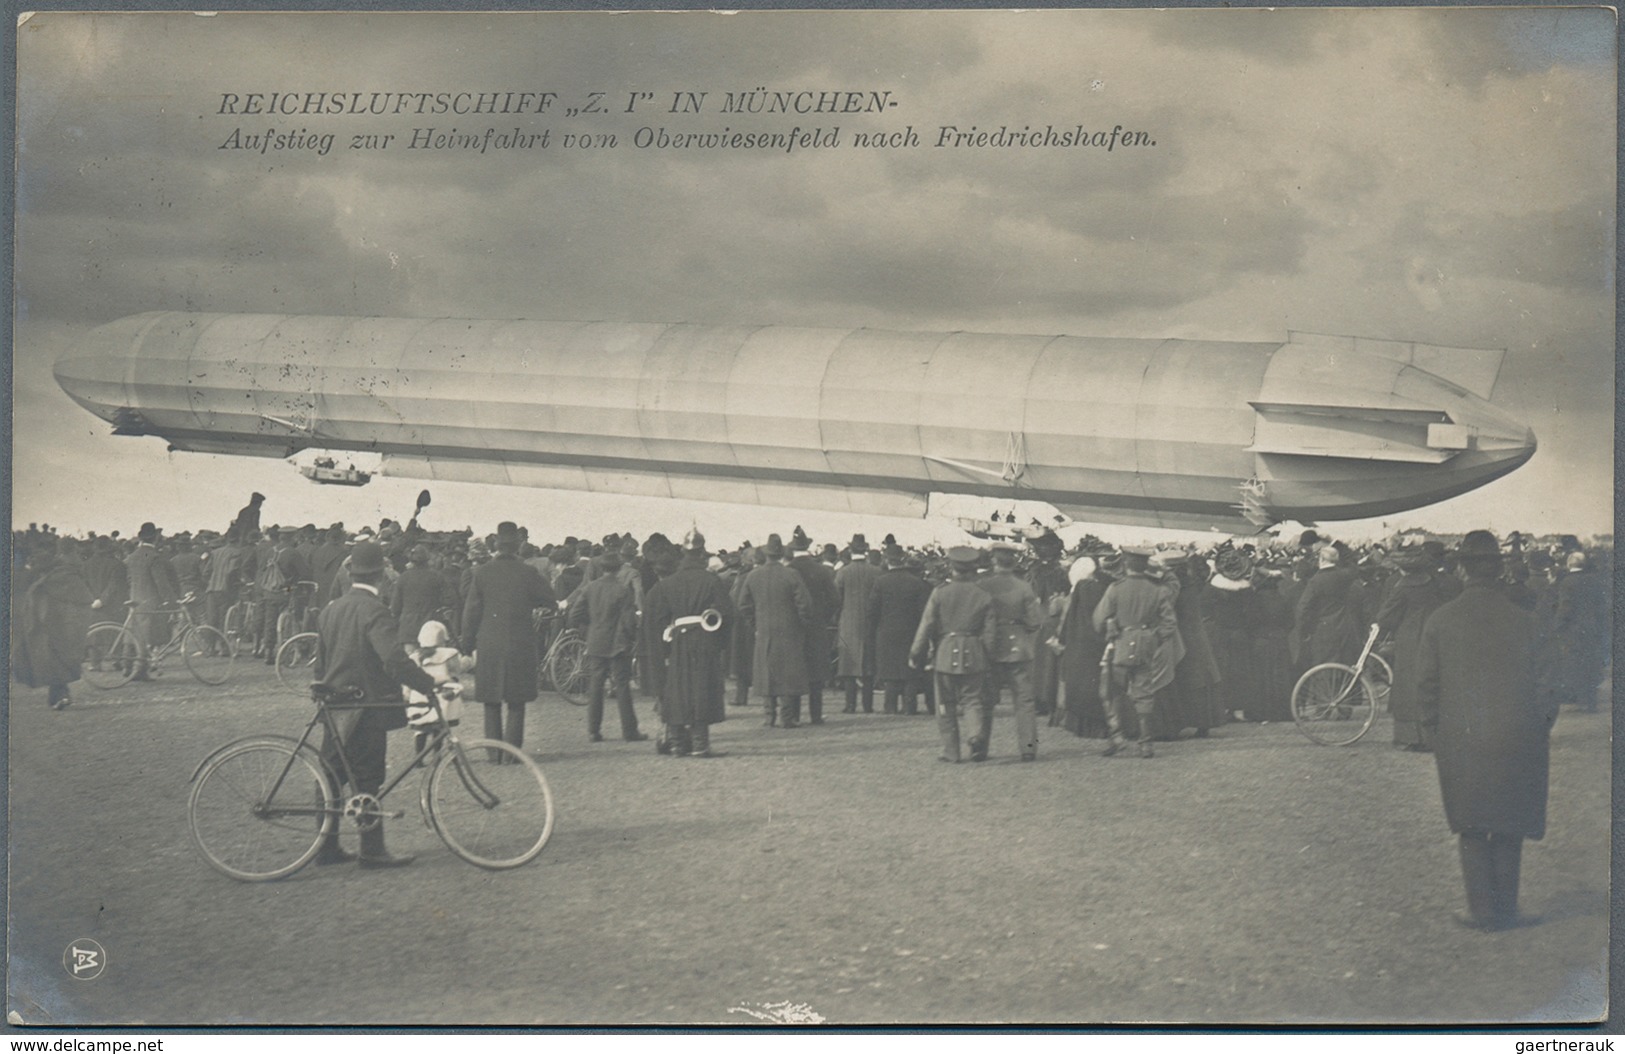 Zeppelinpost Deutschland: Ca 185 Zeppelin postcards and a few photos, with a large number of pieces